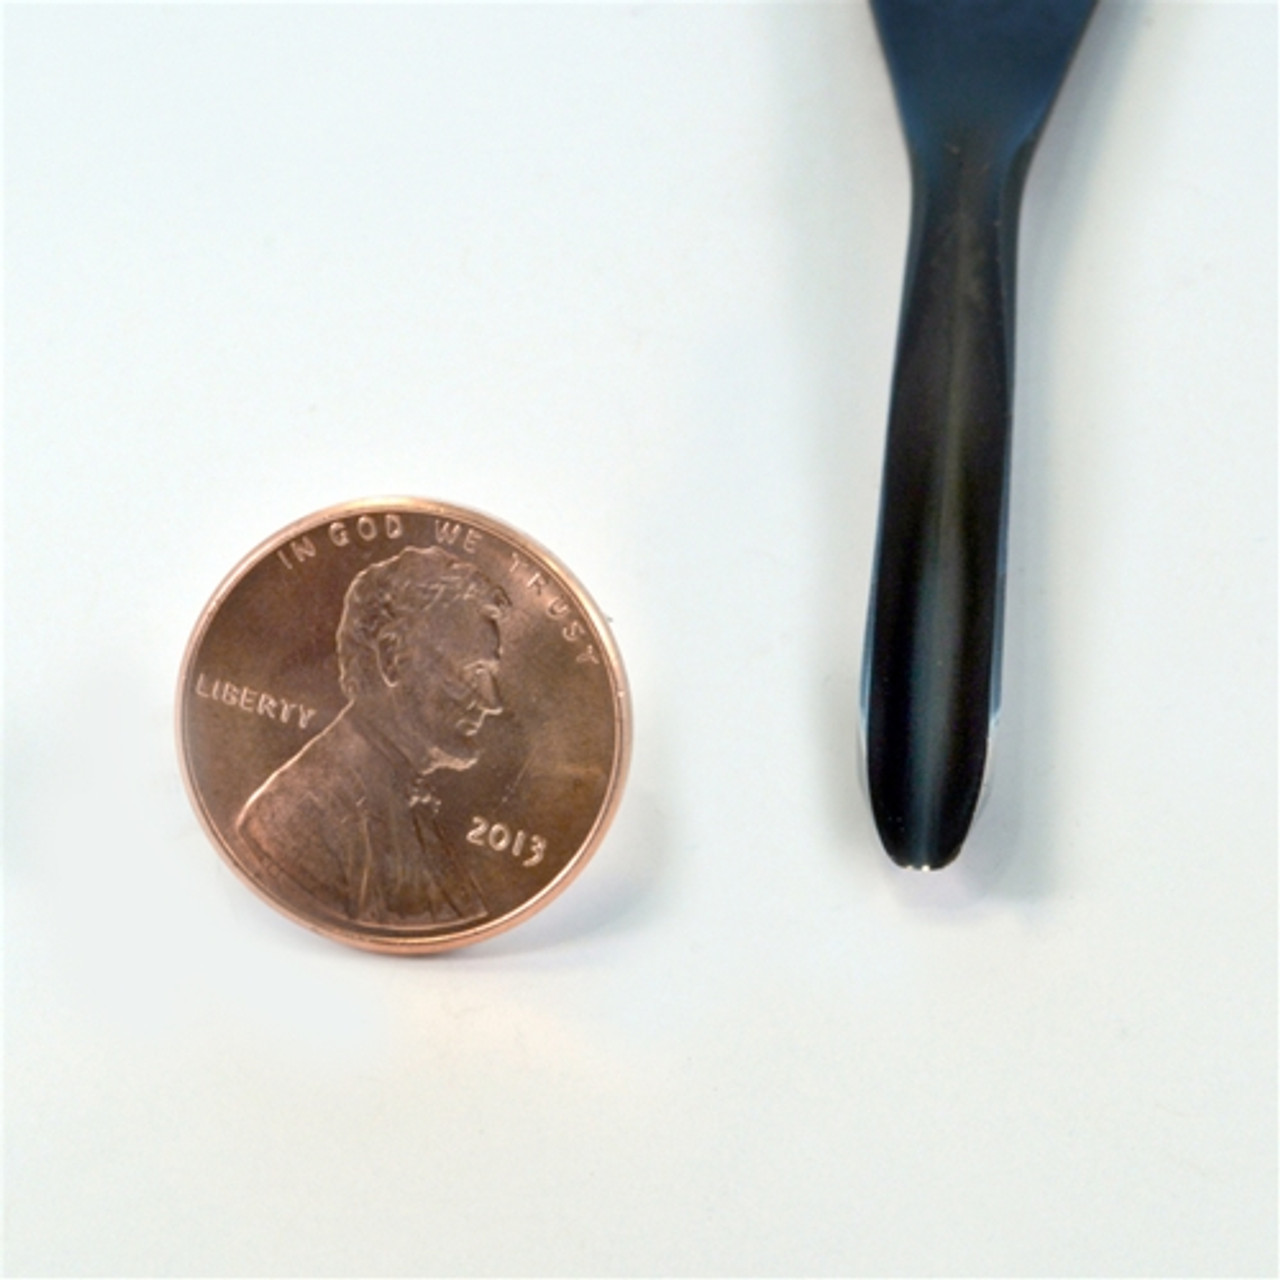 Flexcut FR725 Palm  #11 x 3/16"Thumbnail Gouge next to a penny to compare the size of the bevel along the cutting edge.